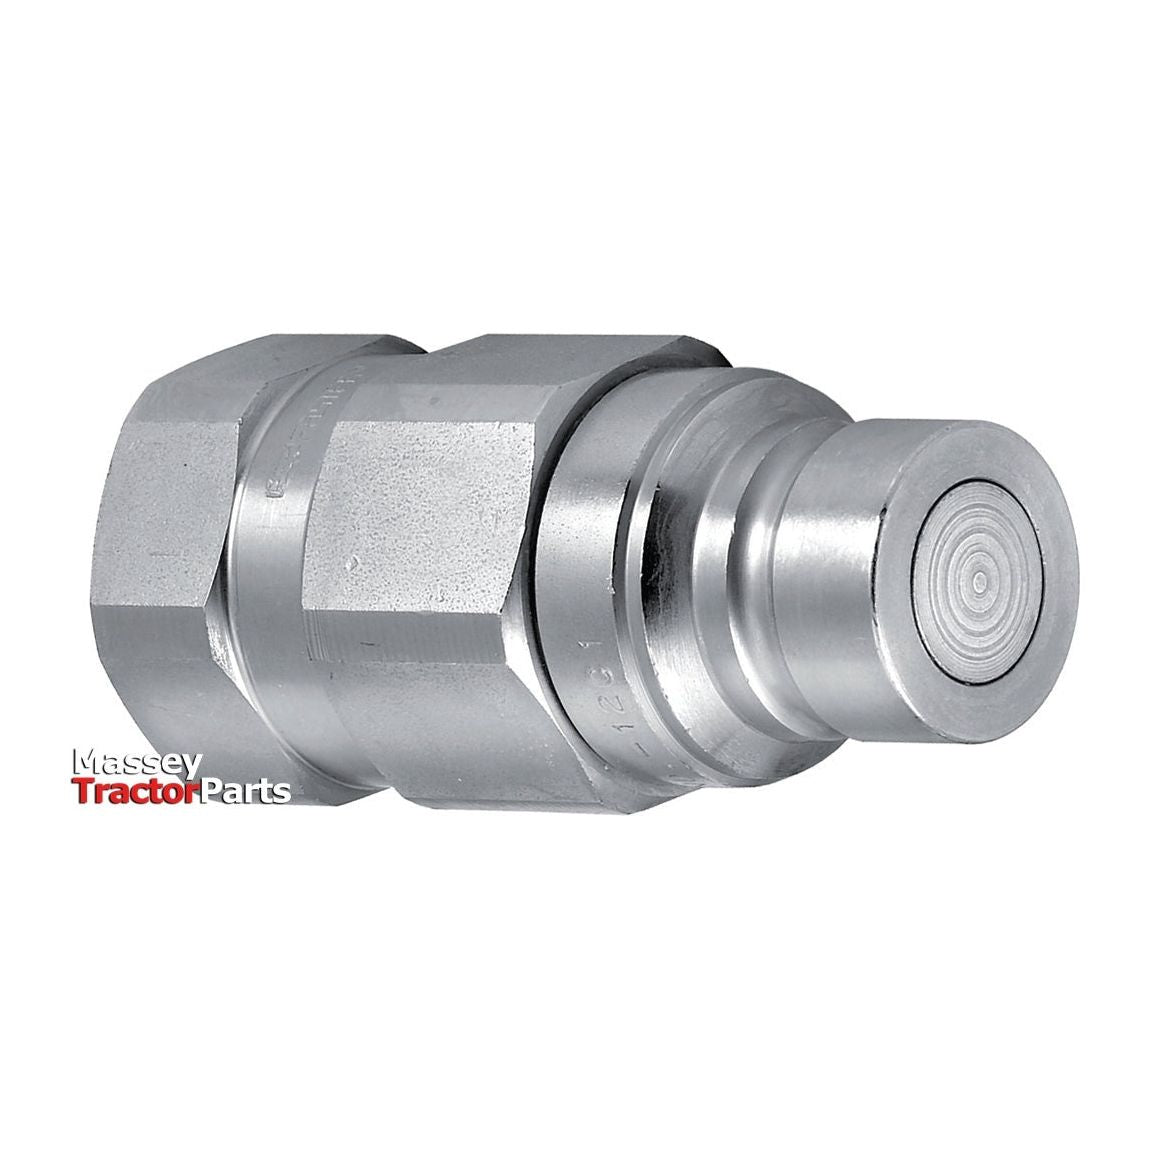 Faster Faster Flat Faced Coupling Male 1/4" Body x 1/4" BSP Female Thread - S.112682 - Farming Parts